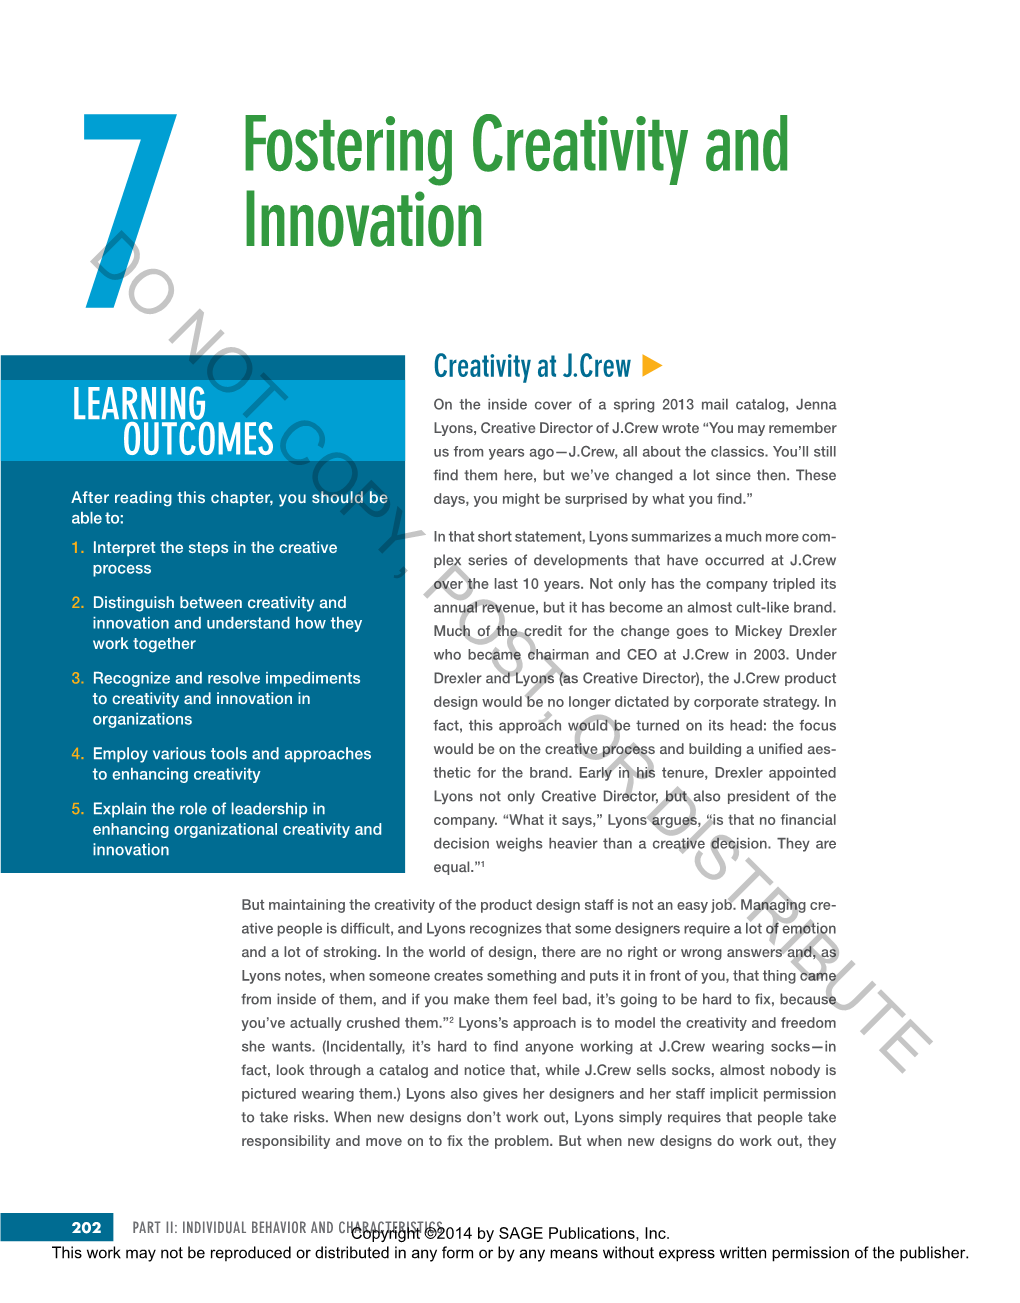 Fostering Creativity and Innovation 203 This Work May Not Be Reproduced Or Distributed in Any Form Or by Any Means Without Express Written Permission of the Publisher